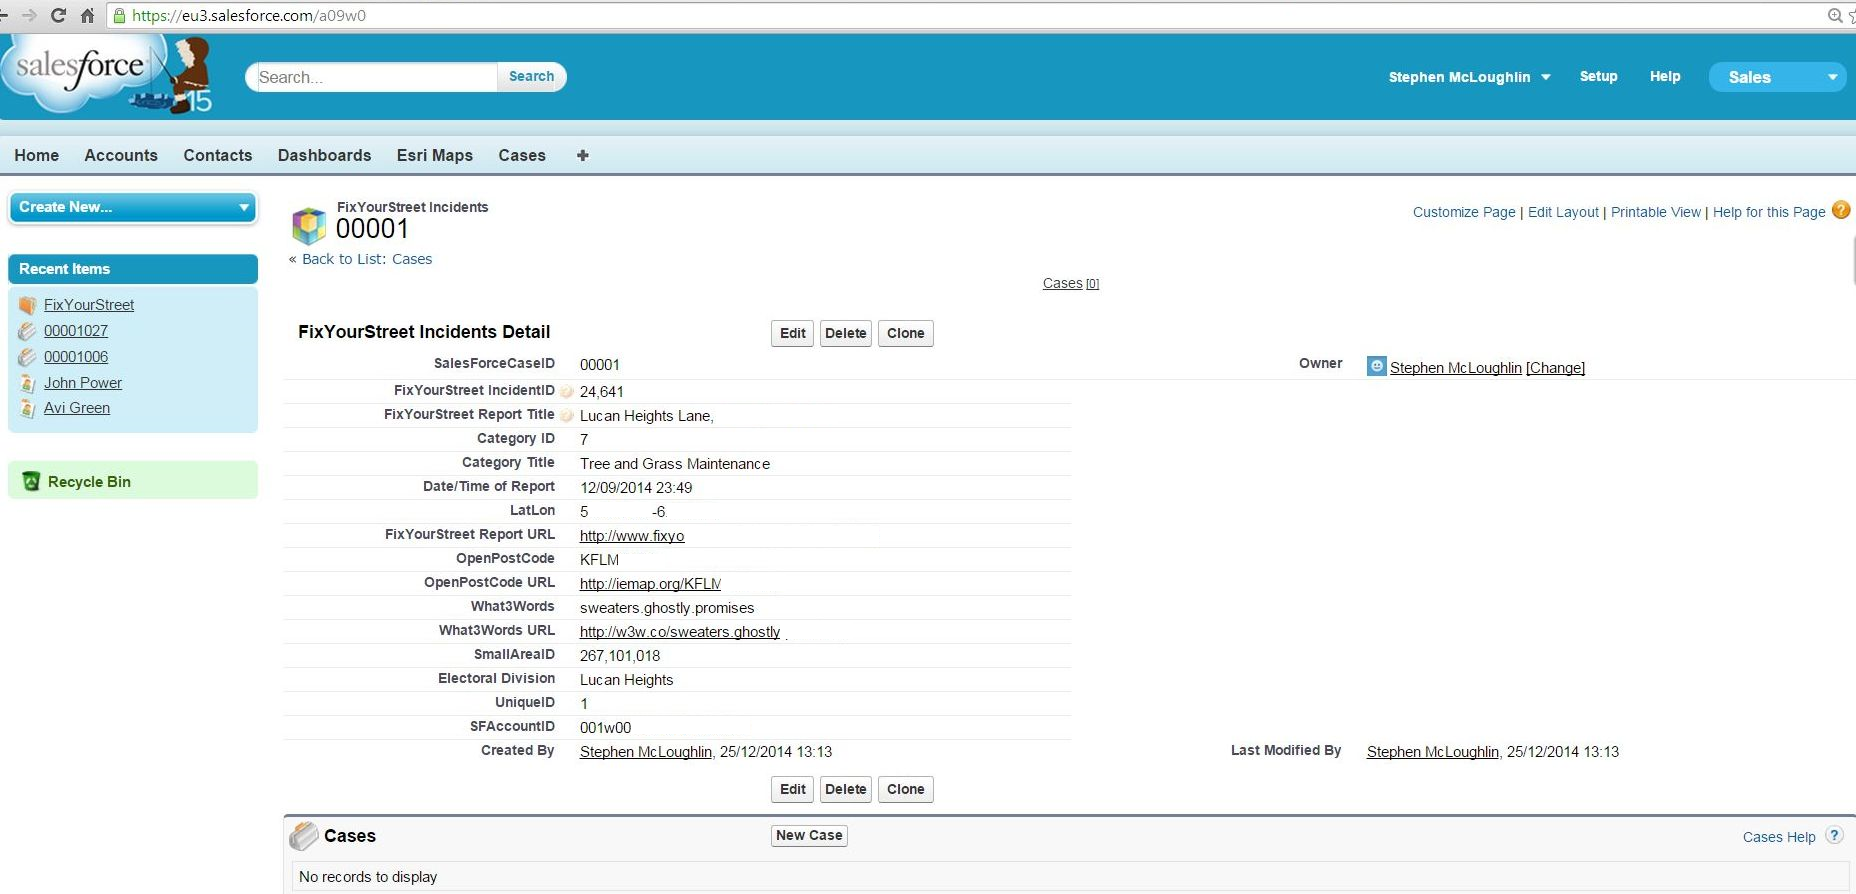 Imported incidents viewable in Salesforce using RecordID in URL